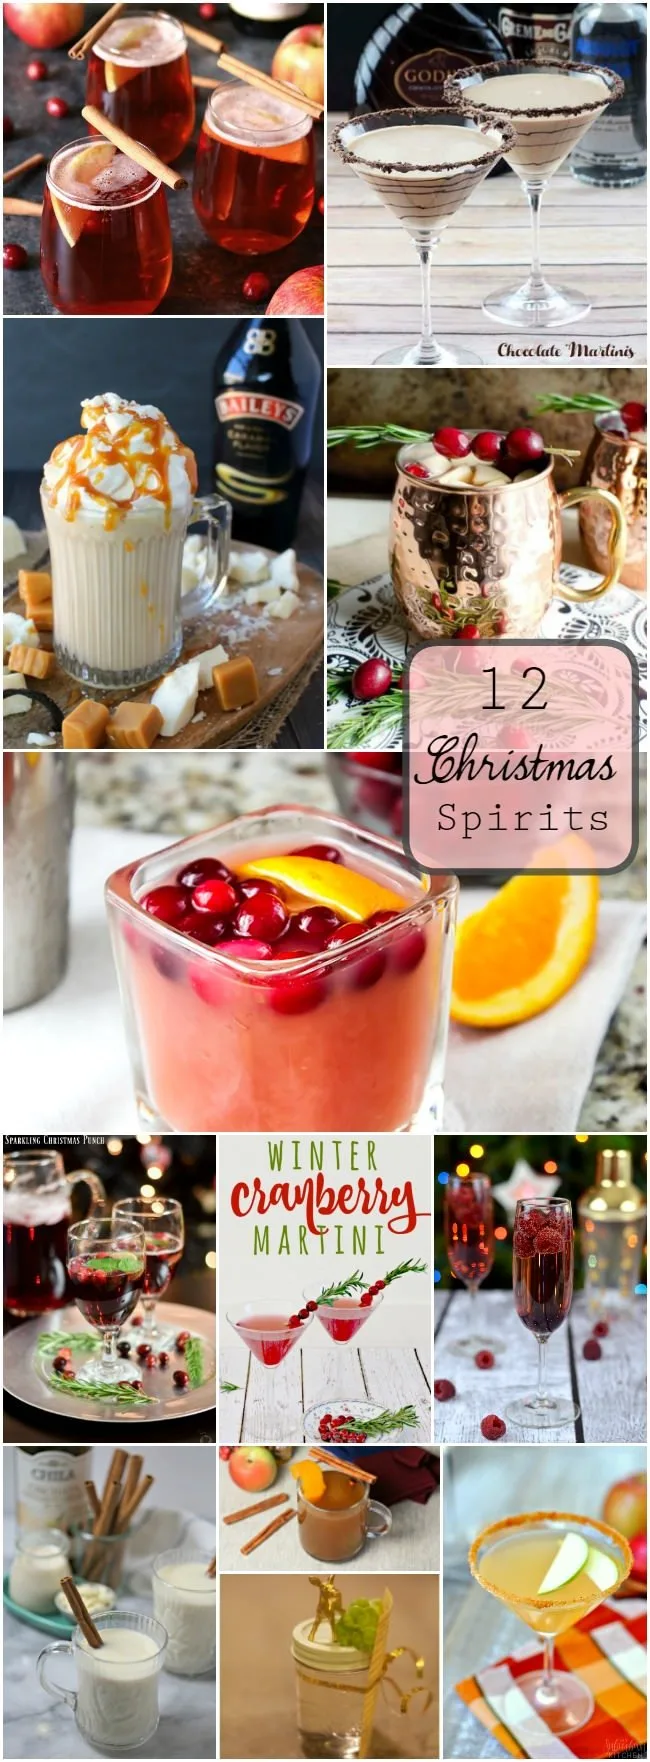 Enjoy these 12 Christmas Spirits this holiday! They are sure to get you and your company in the jolliest of moods!